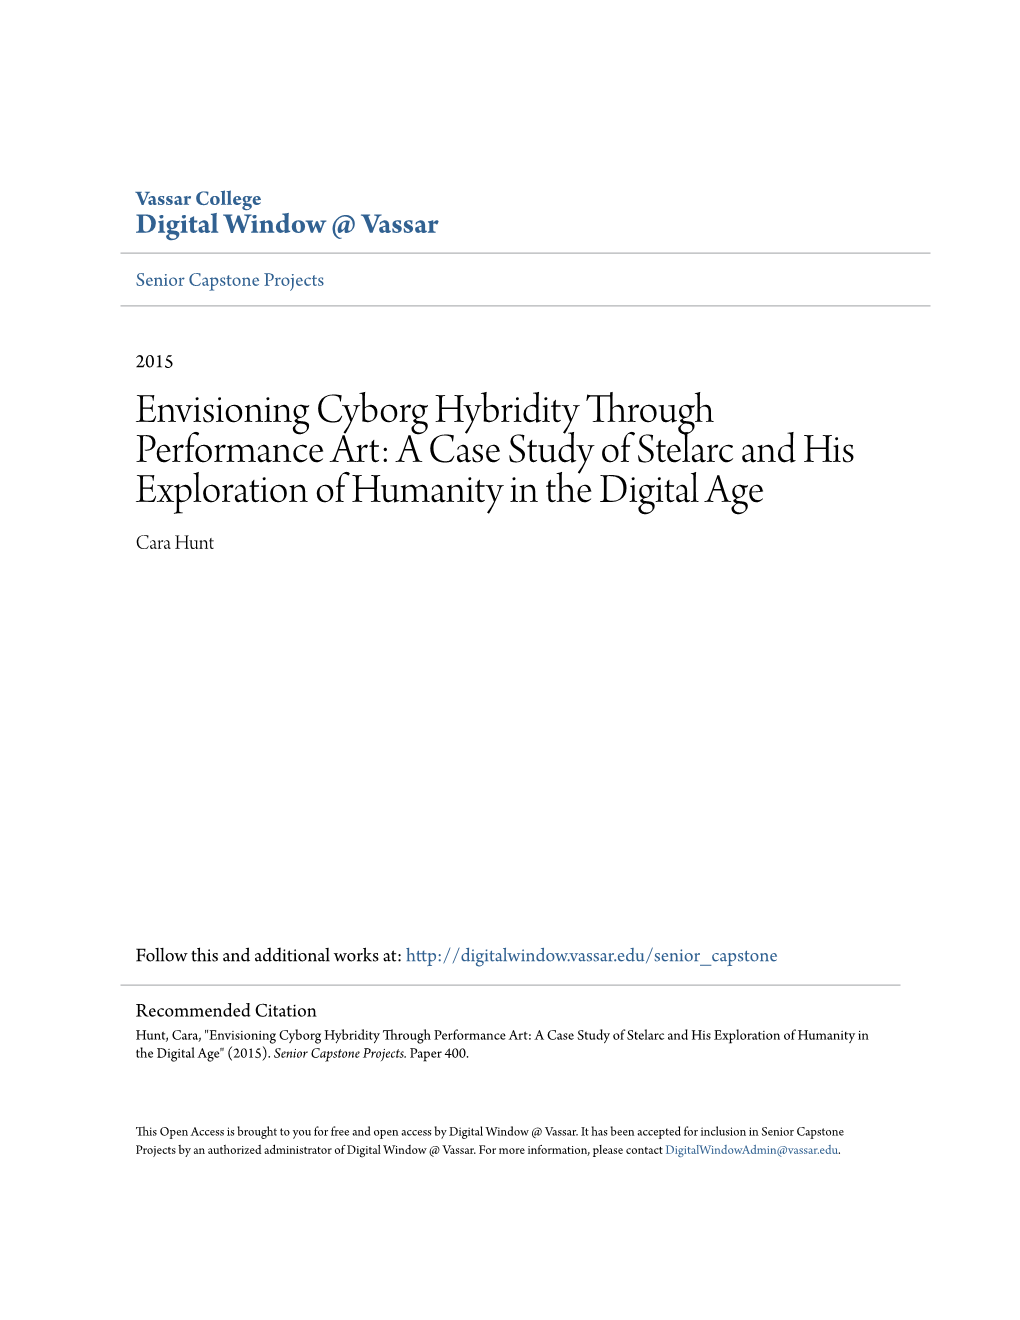 Envisioning Cyborg Hybridity Through Performance Art: a Case Study of Stelarc and His Exploration of Humanity in the Digital Age Cara Hunt